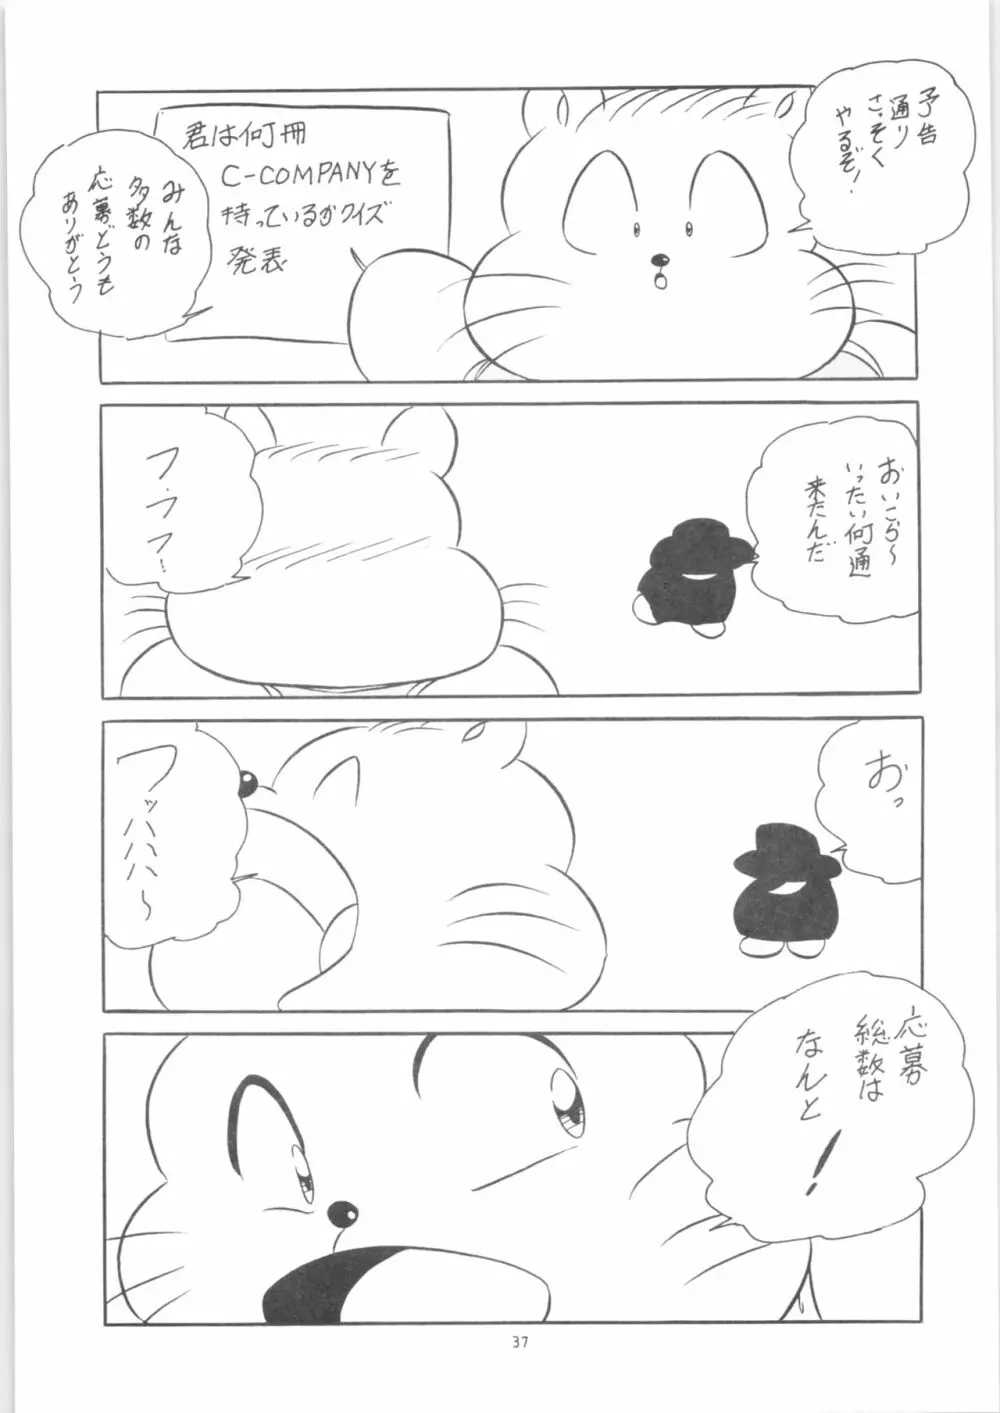 C-COMPANY SPECIAL STAGE 13 Page.38